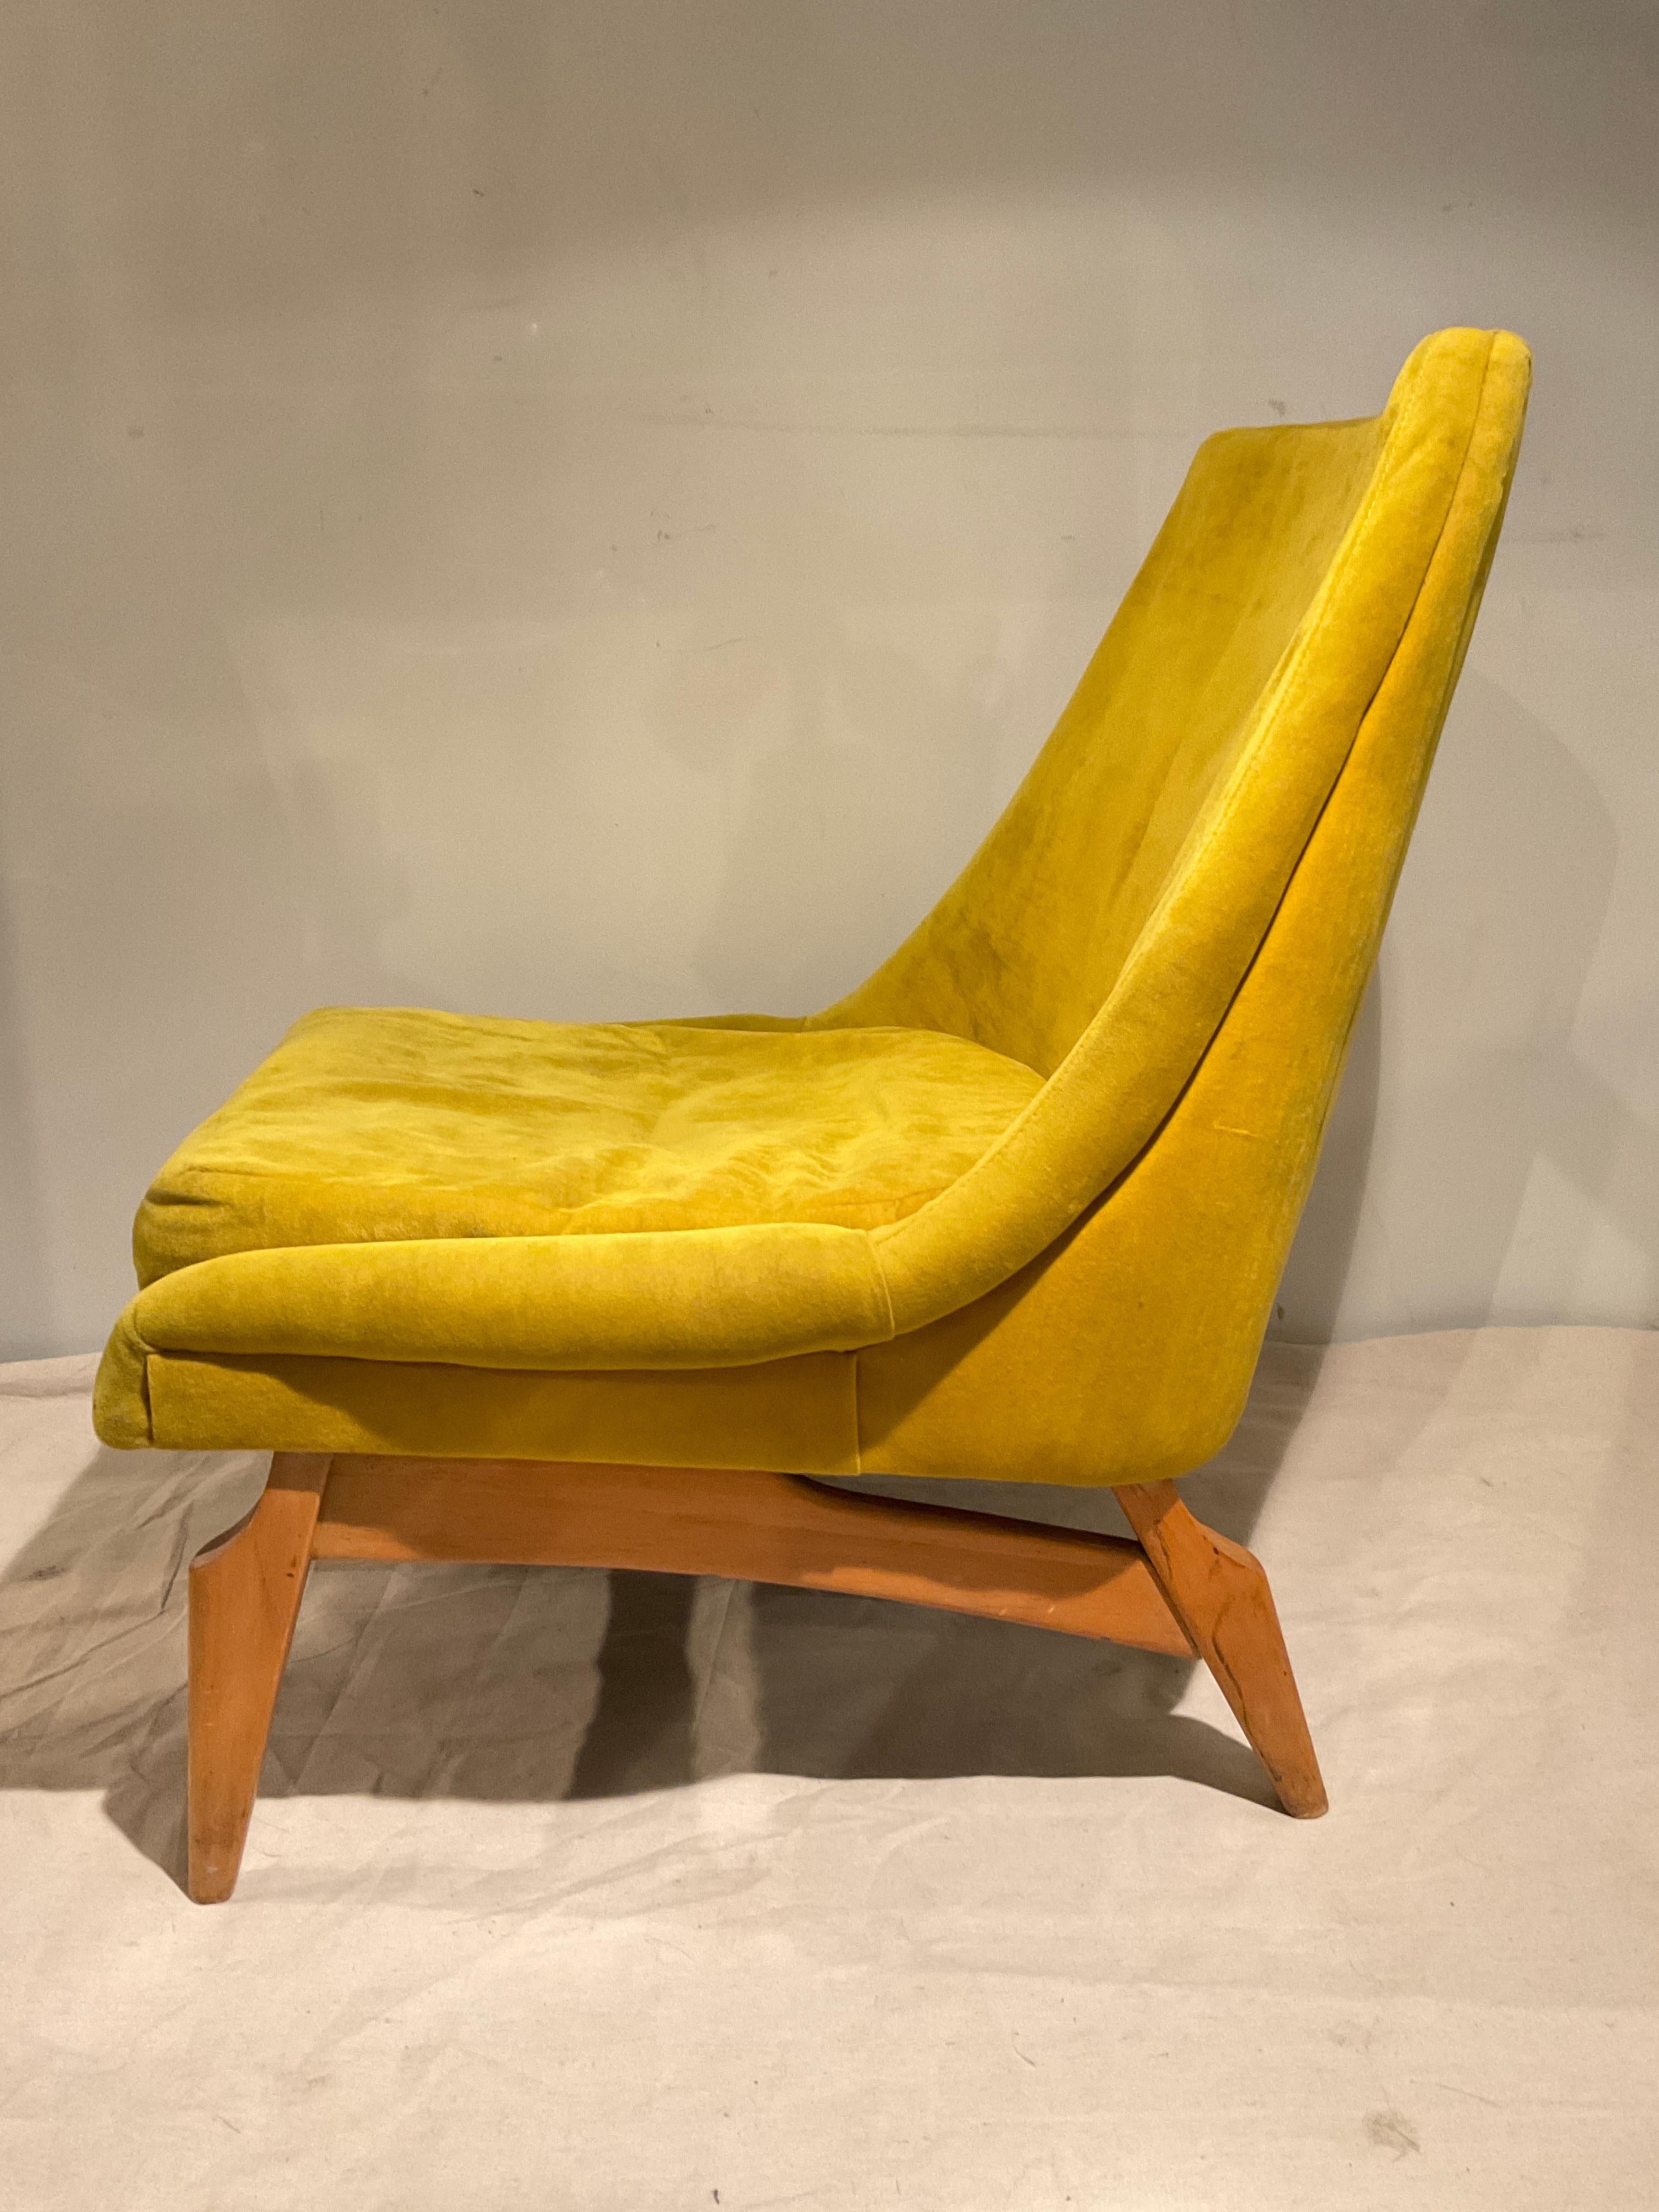 1950s Lounge Chair In Good Condition For Sale In Tarrytown, NY